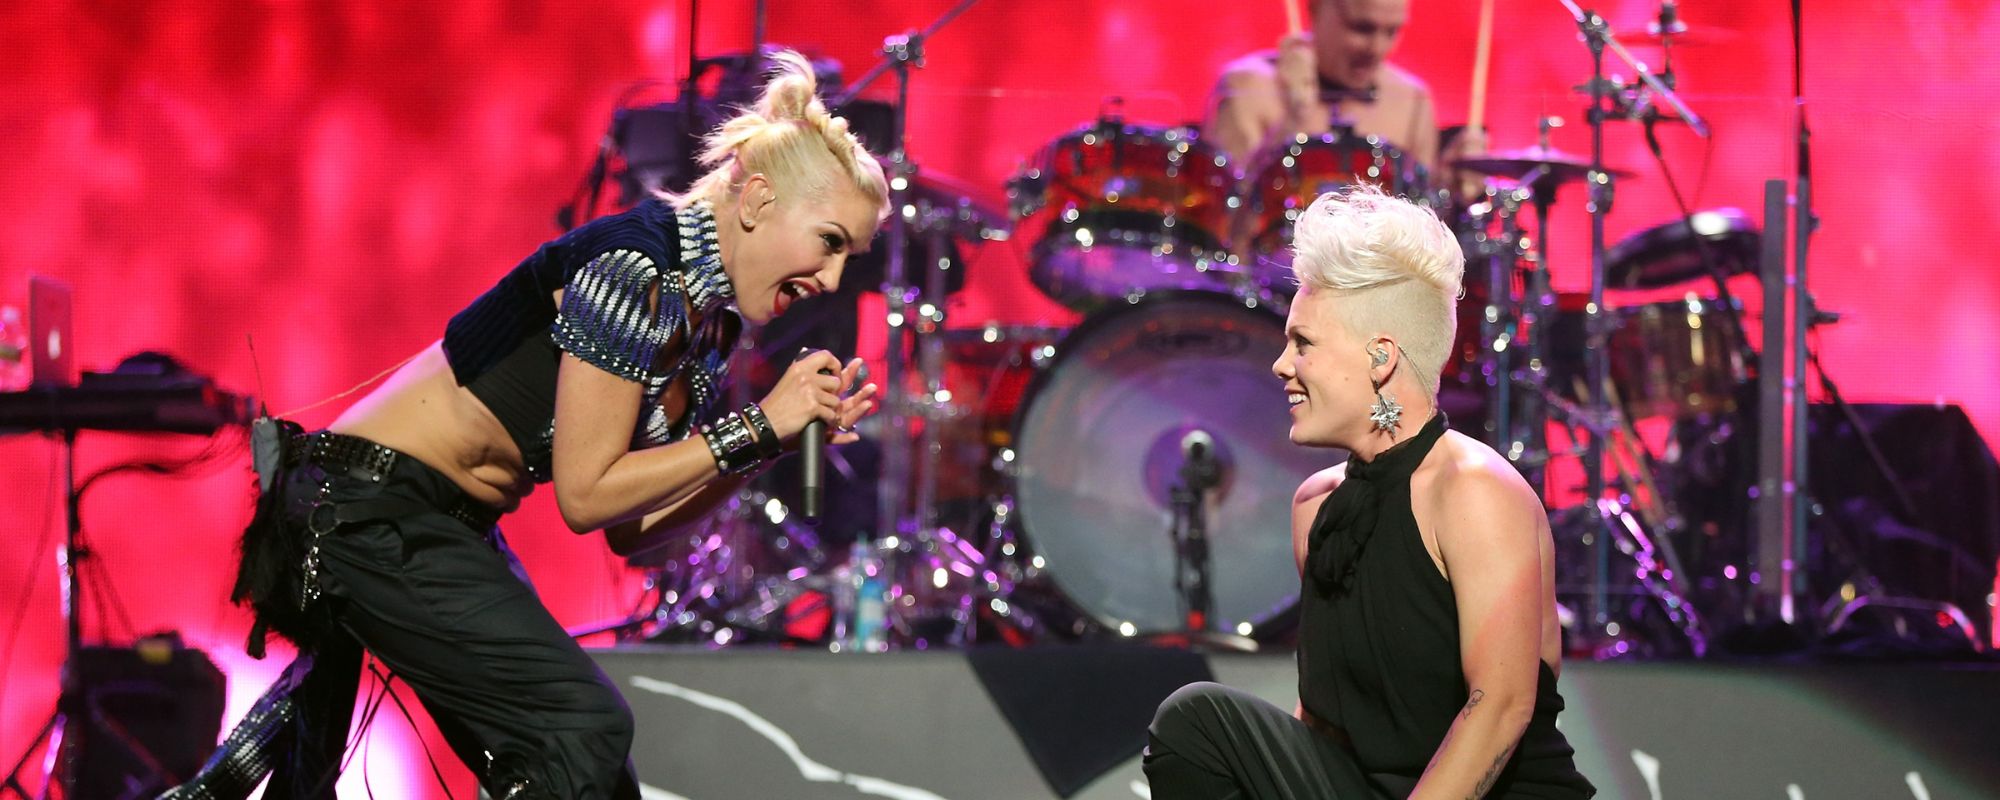 Pink and Gwen Stefani Praise Each Other Online Following Live Shows: “Such a Superhero”